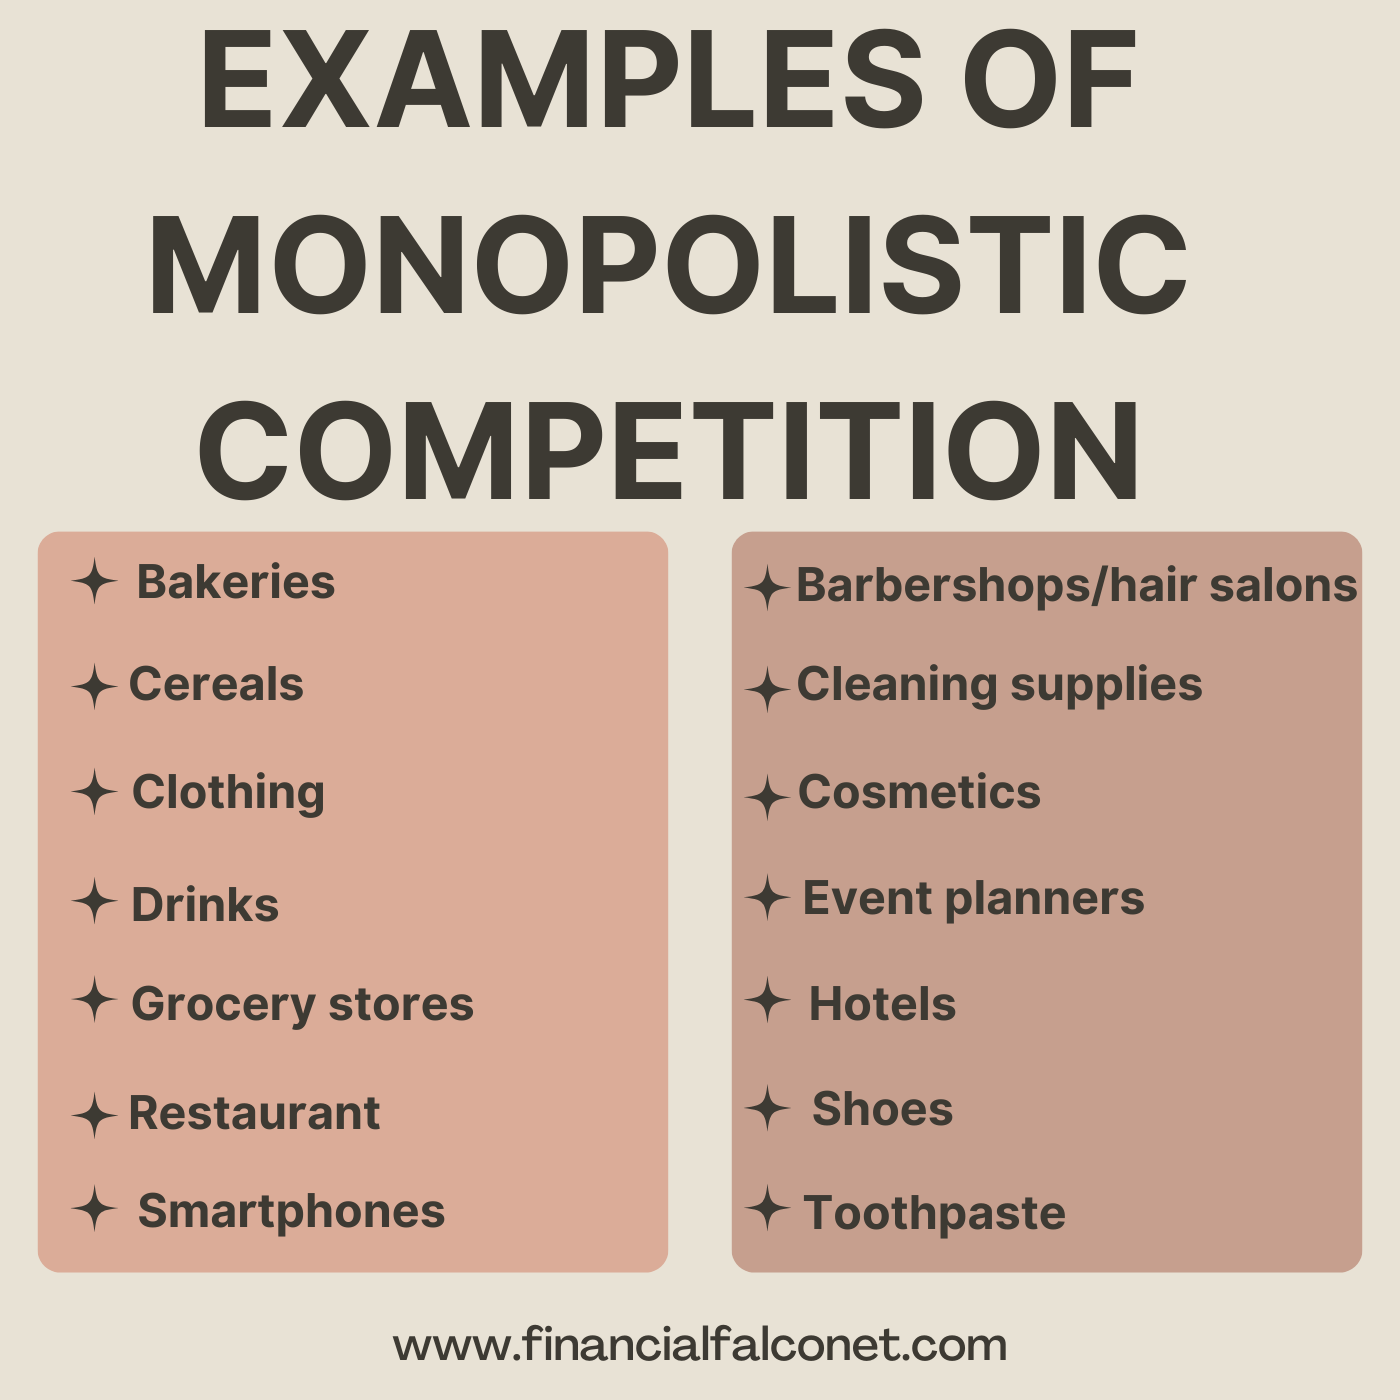 Monopolistic competition examples